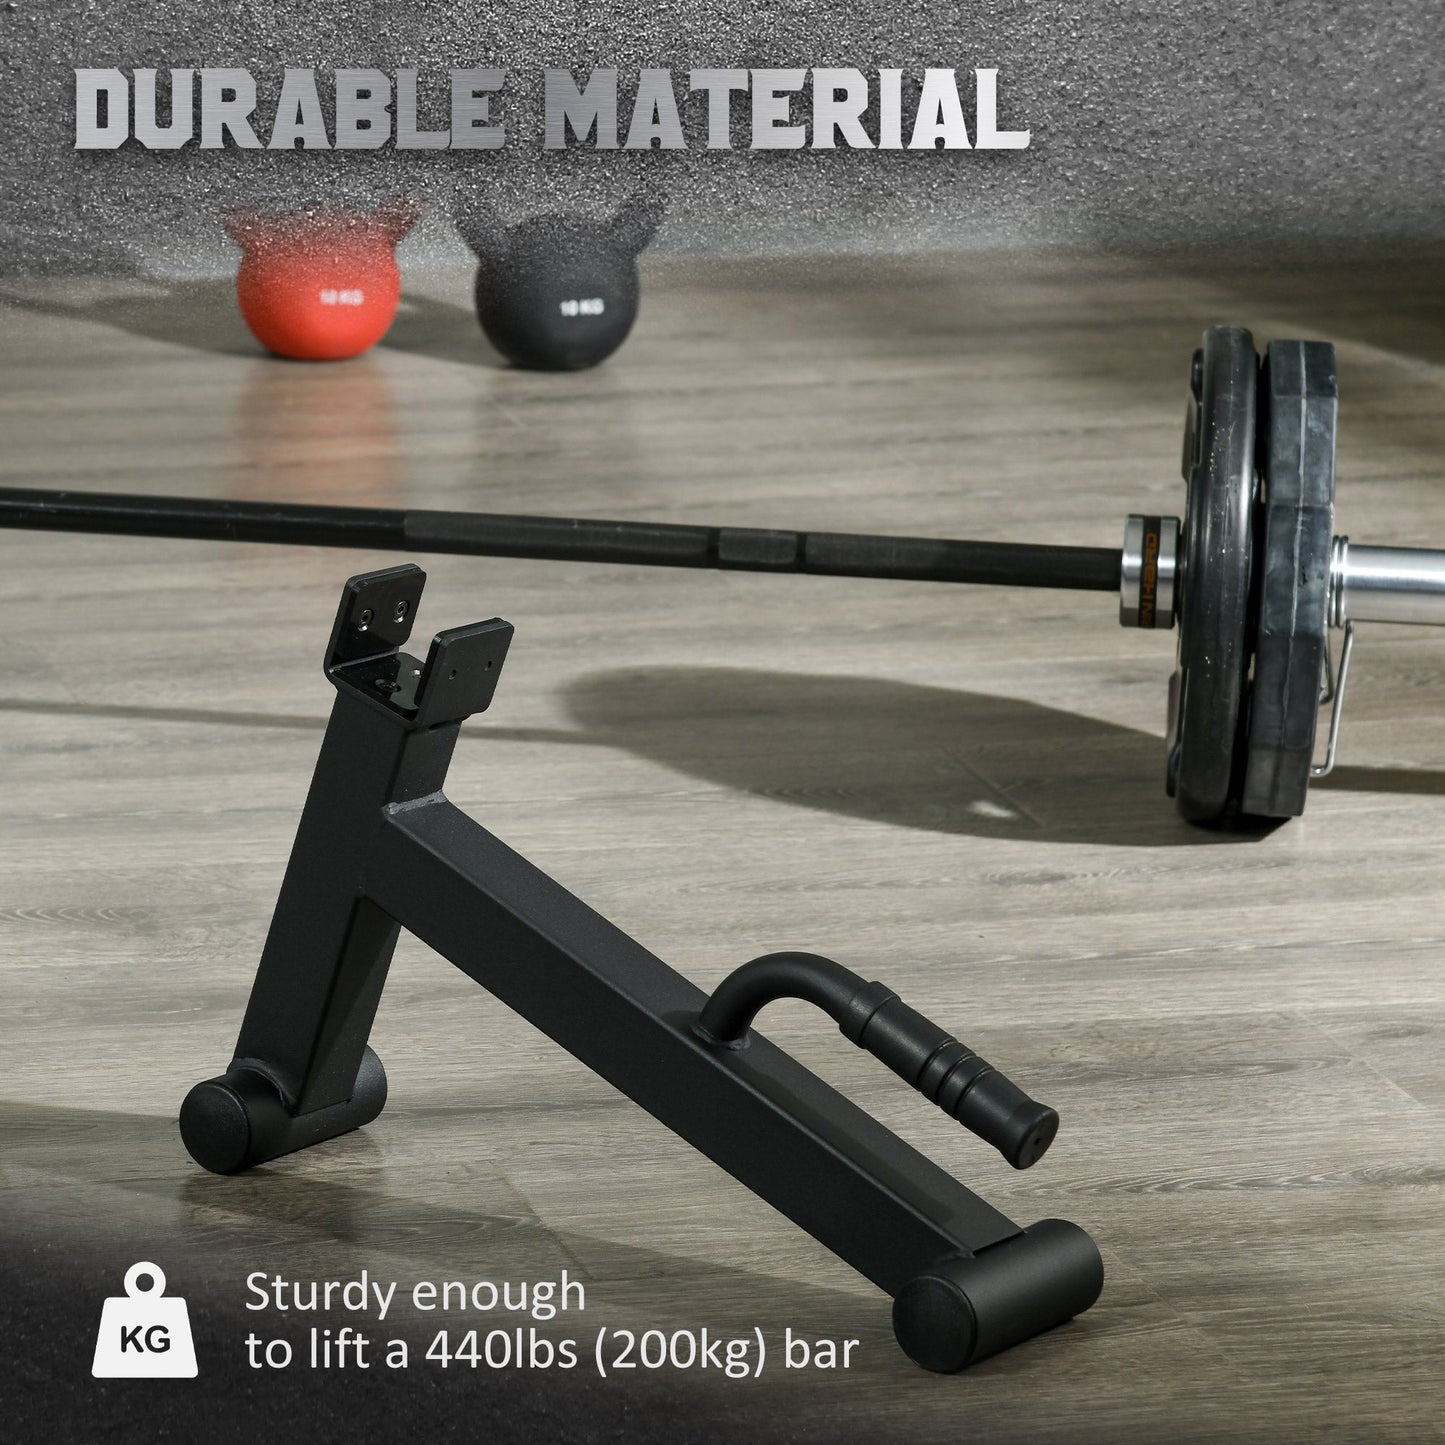 Barbell Jack, Deadlift Jack with Non-Slip Handle, Easily Load and Unload 440lbs Barbell Plates, for Home Gym Deadlifting Weight Training at Gallery Canada